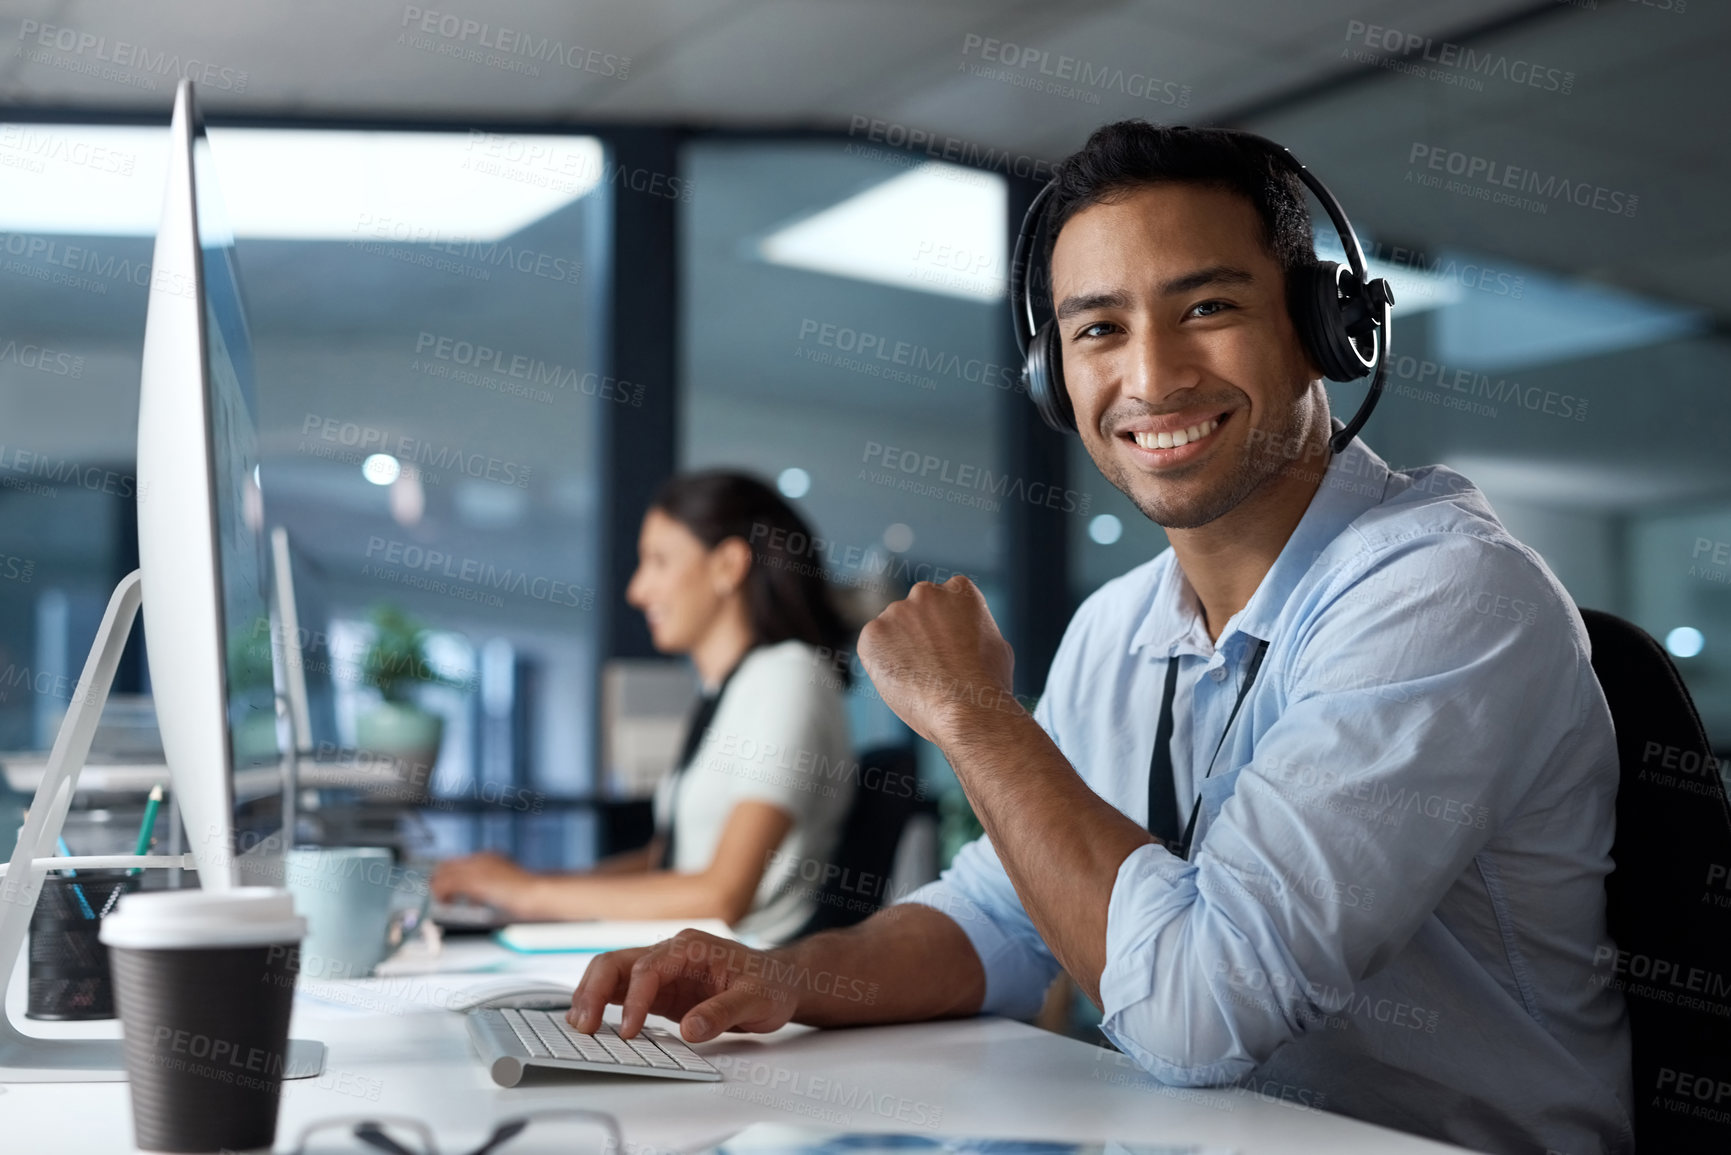 Buy stock photo Portrait of a young man using a headset and computer in a modern office